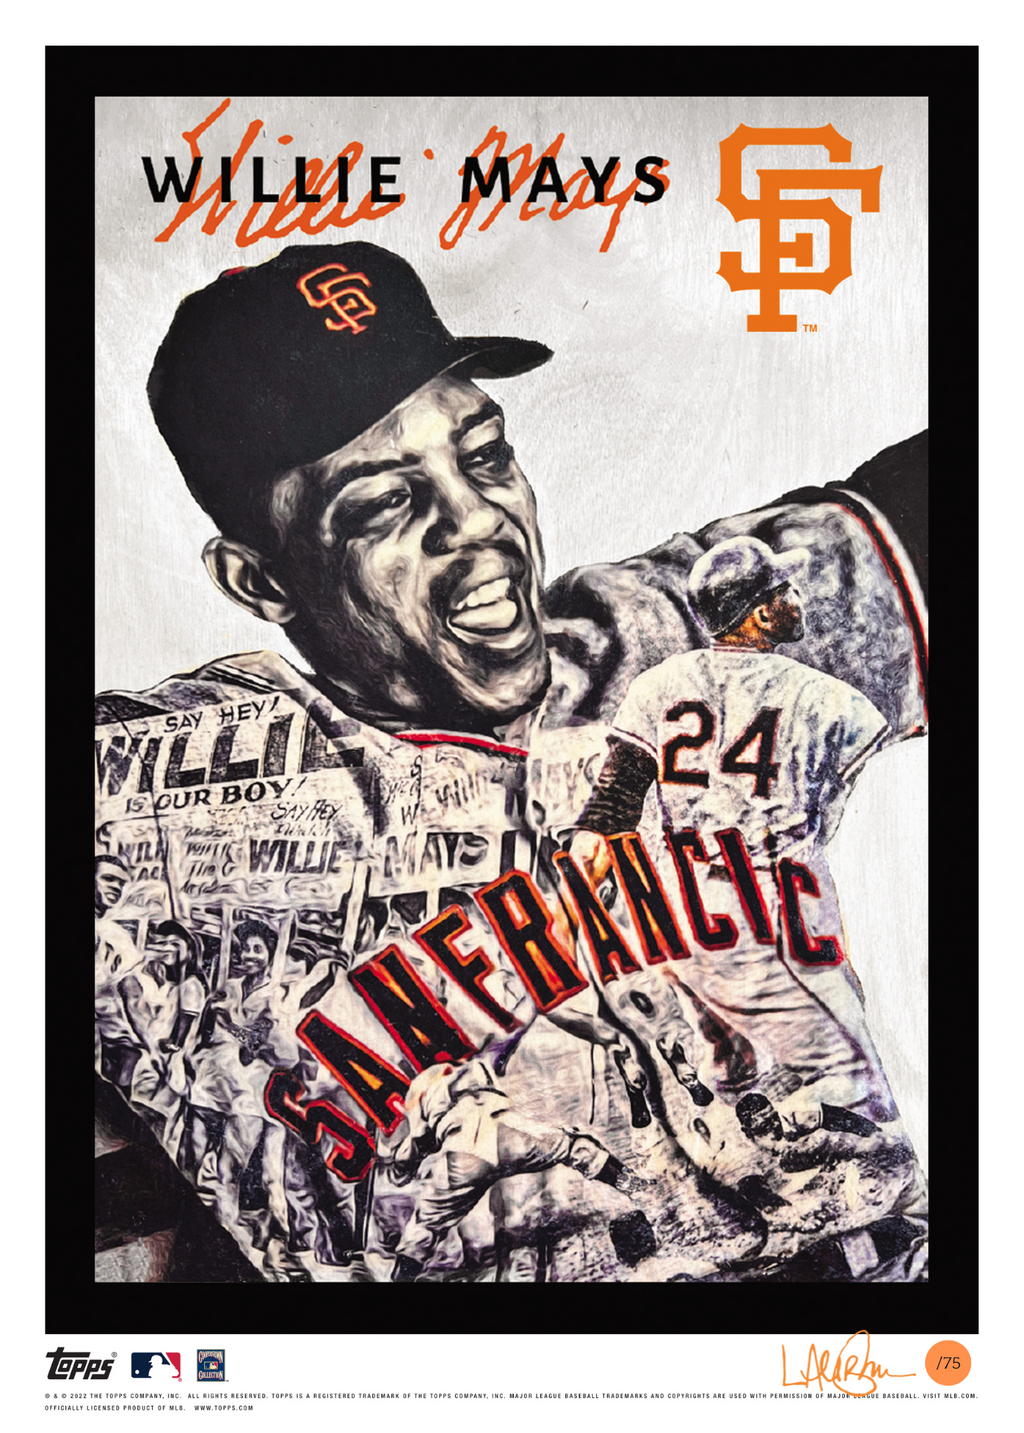 /75 Orange Artist Signature - Topps Wall Art (10x14) of card #741 by Lauren Taylor - Willie Mays